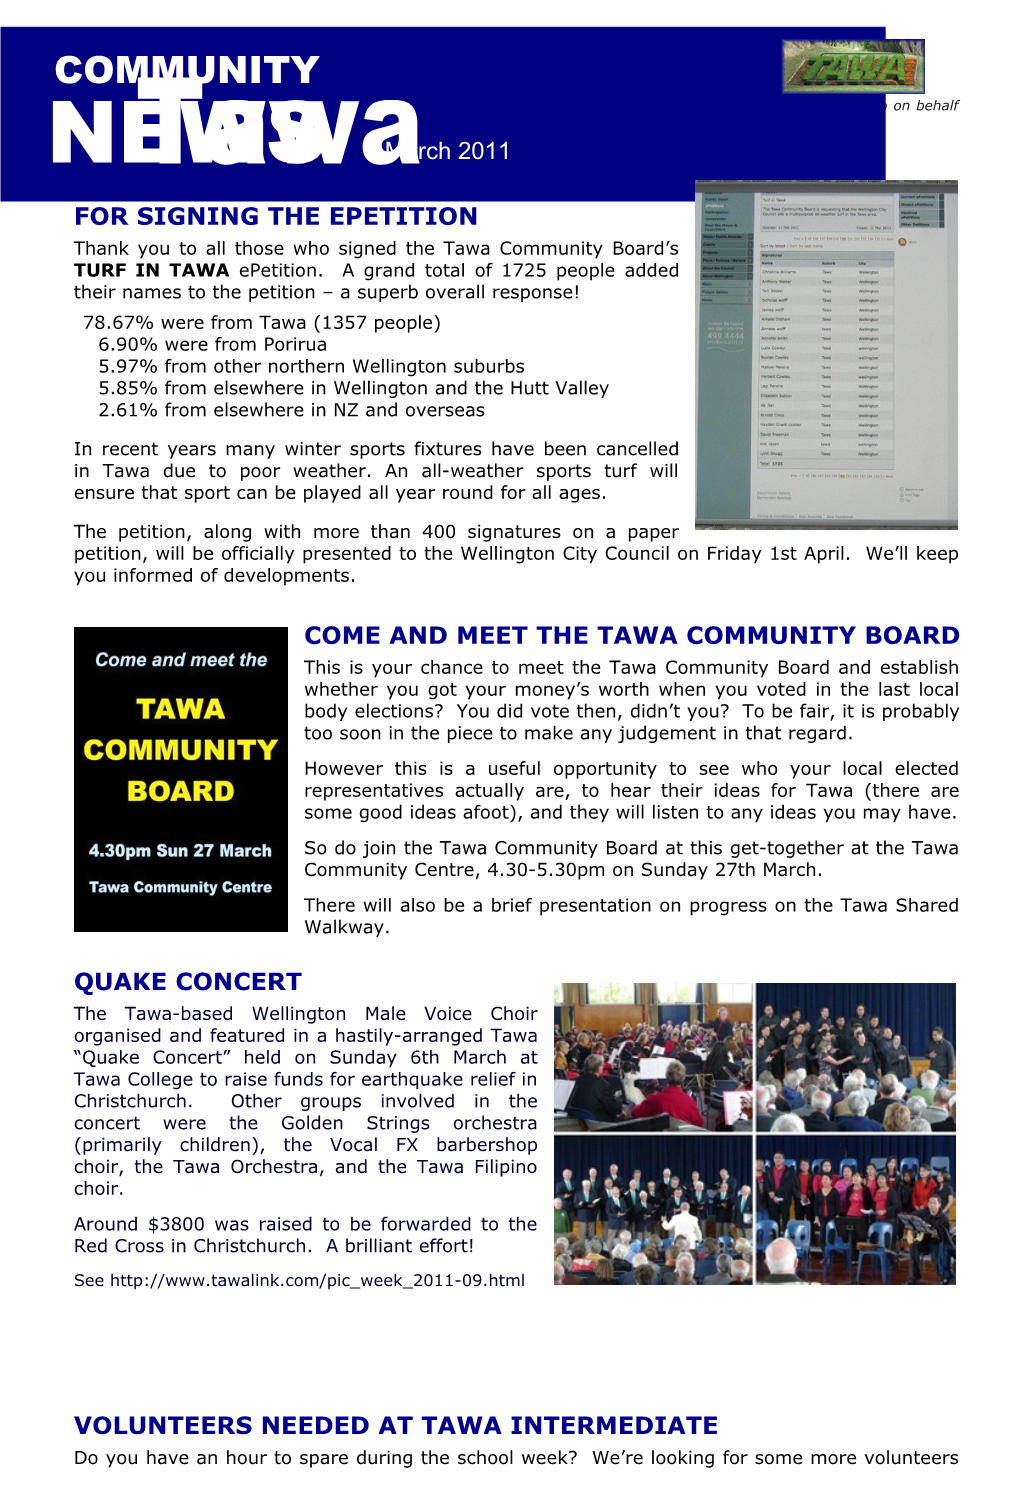 This Community Newsletter Is Compiled Every Month Or So on Behalf of Tawalink.Com, Tawa